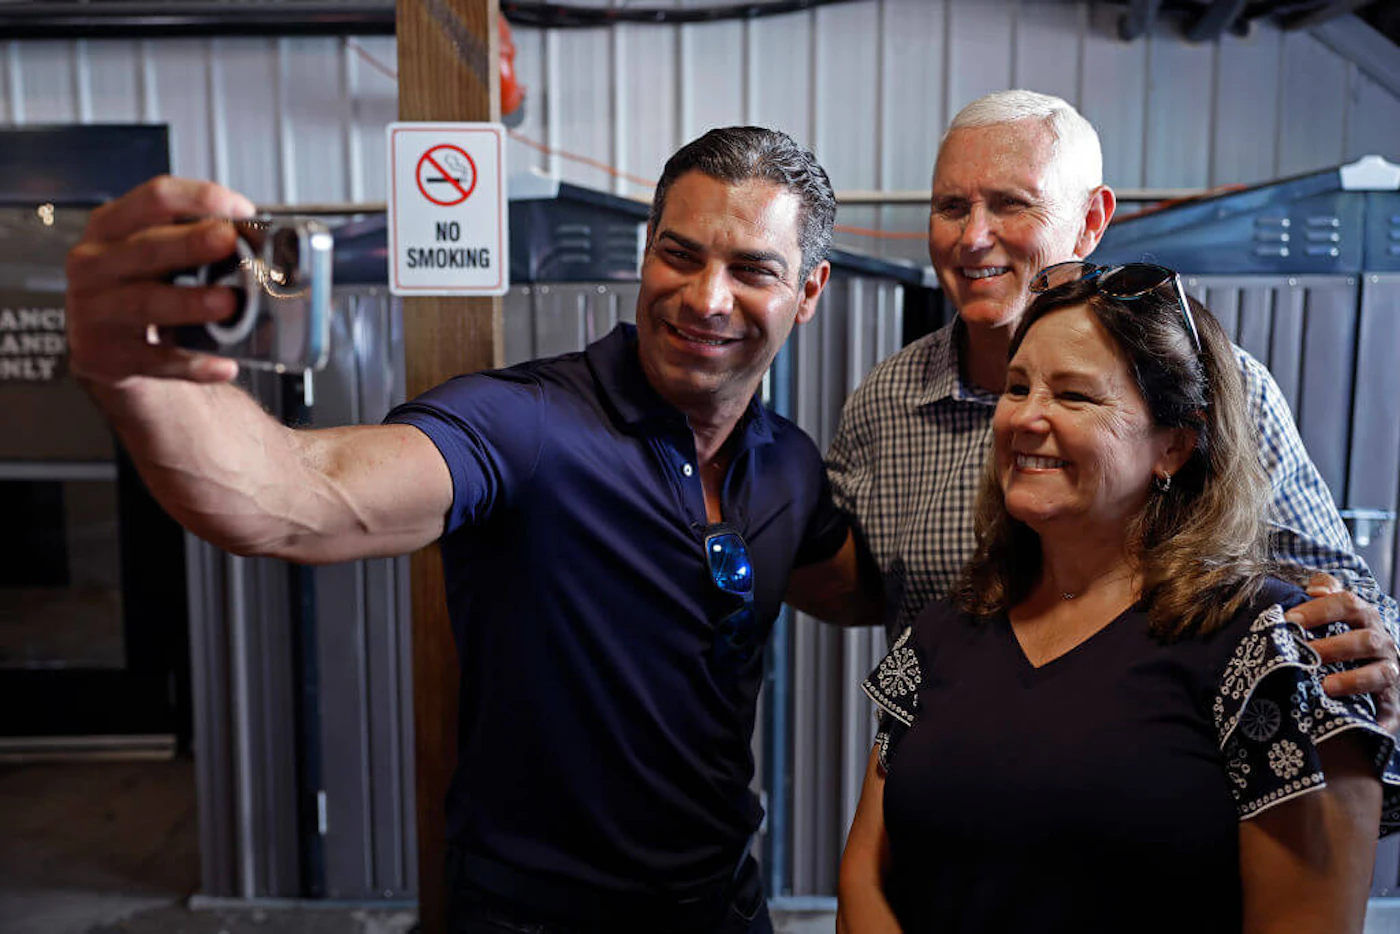 DES MOINES, IOWA - AUGUST 11: Miami Mayor Francis Suarez (L) poses for a selfie with former U.S. Vice President Mike Pence and his wife Karen Pence in between interviews with Iowa Governor Kim Reynolds during the Iowa State Fair on August 11, 2023 in Des Moines, Iowa. Both men are running for the Republican presidential nomination and are spending time at the fair, a political tradition in one of the first states to hold caucuses in 2024. (Photo by Chip Somodevilla/Getty Images)